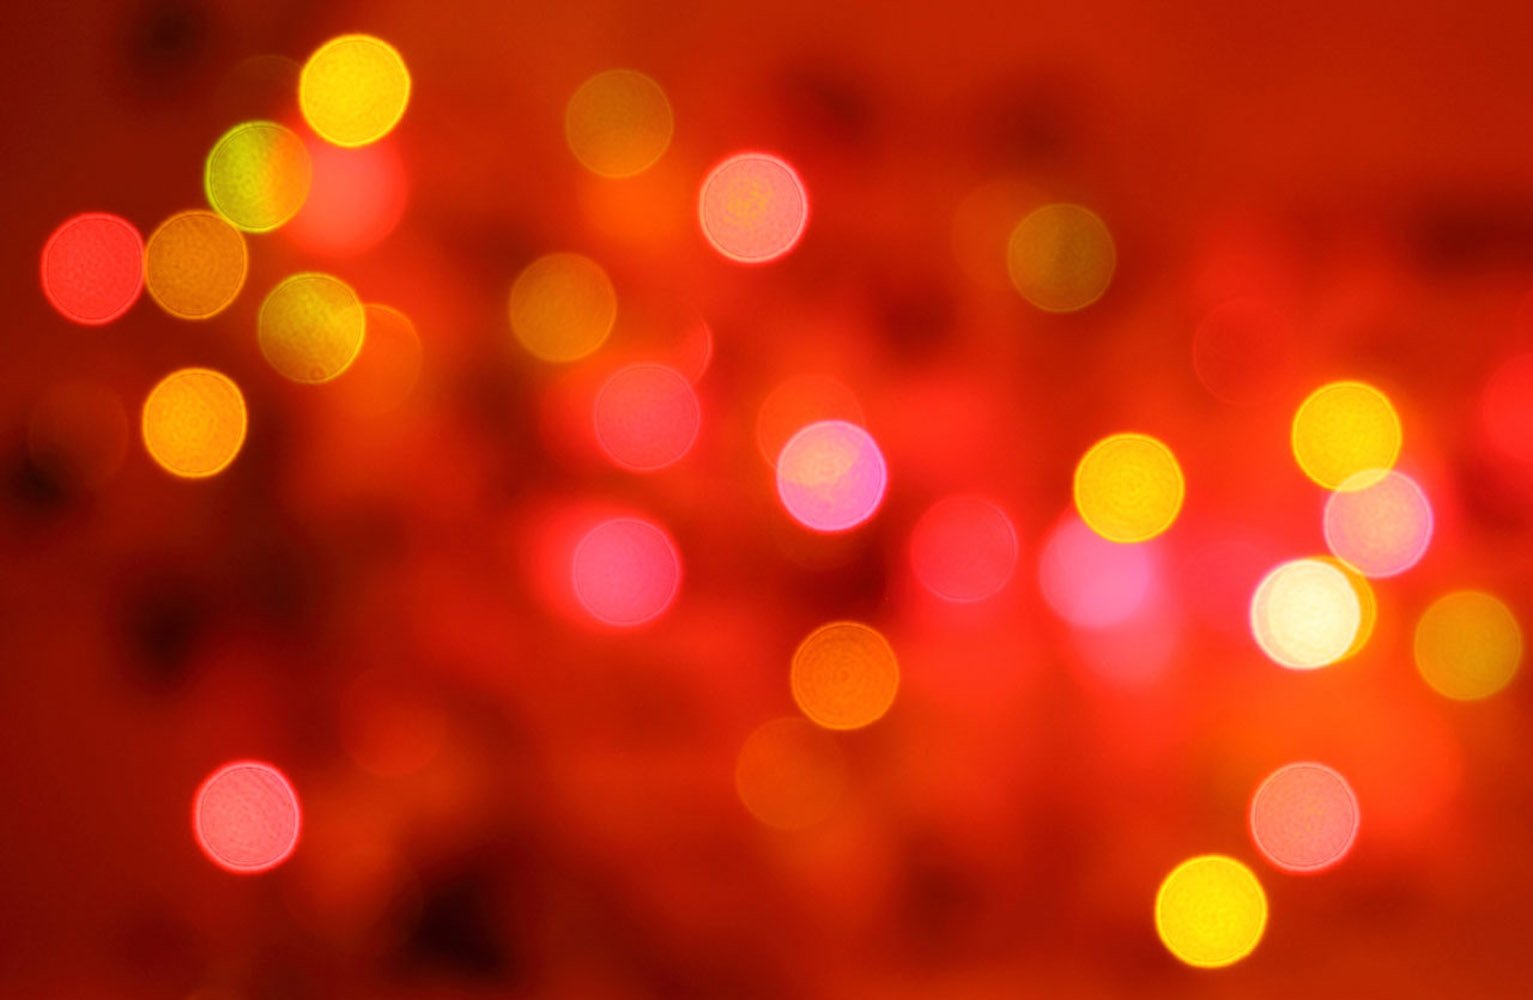 Blurred Christmas Lights Wallpaper and Background Imagex1000